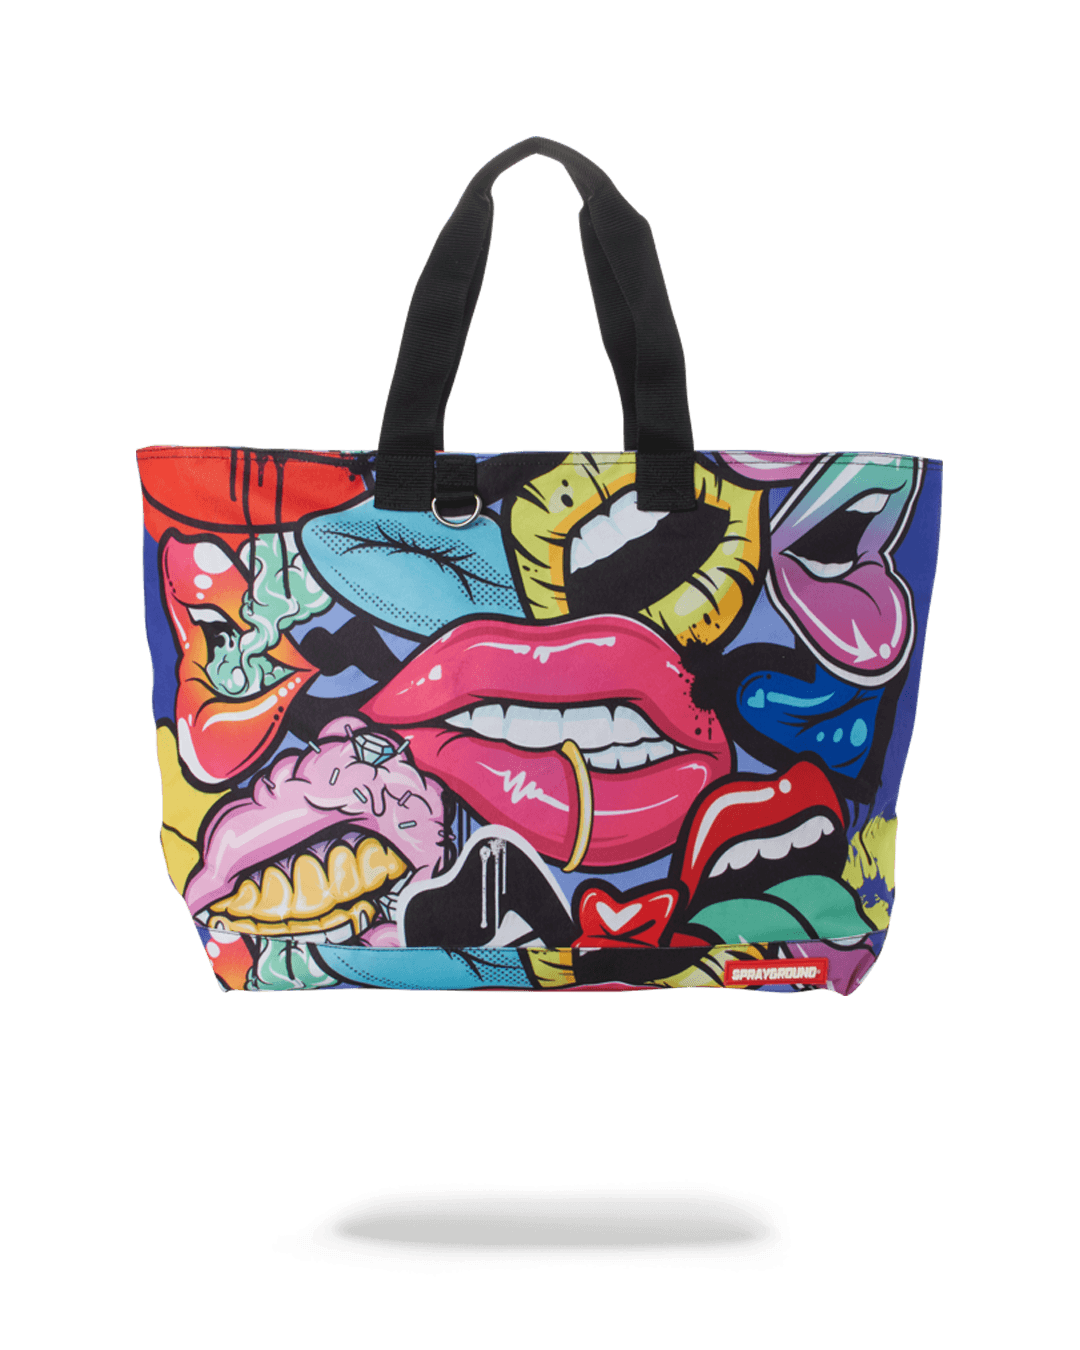 LIP SERVICE BEACH TOTE - HIGH QUALITY AND INEXPENSIVE - LIP SERVICE BEACH TOTE HIGH QUALITY AND INEXPENSIVE-31